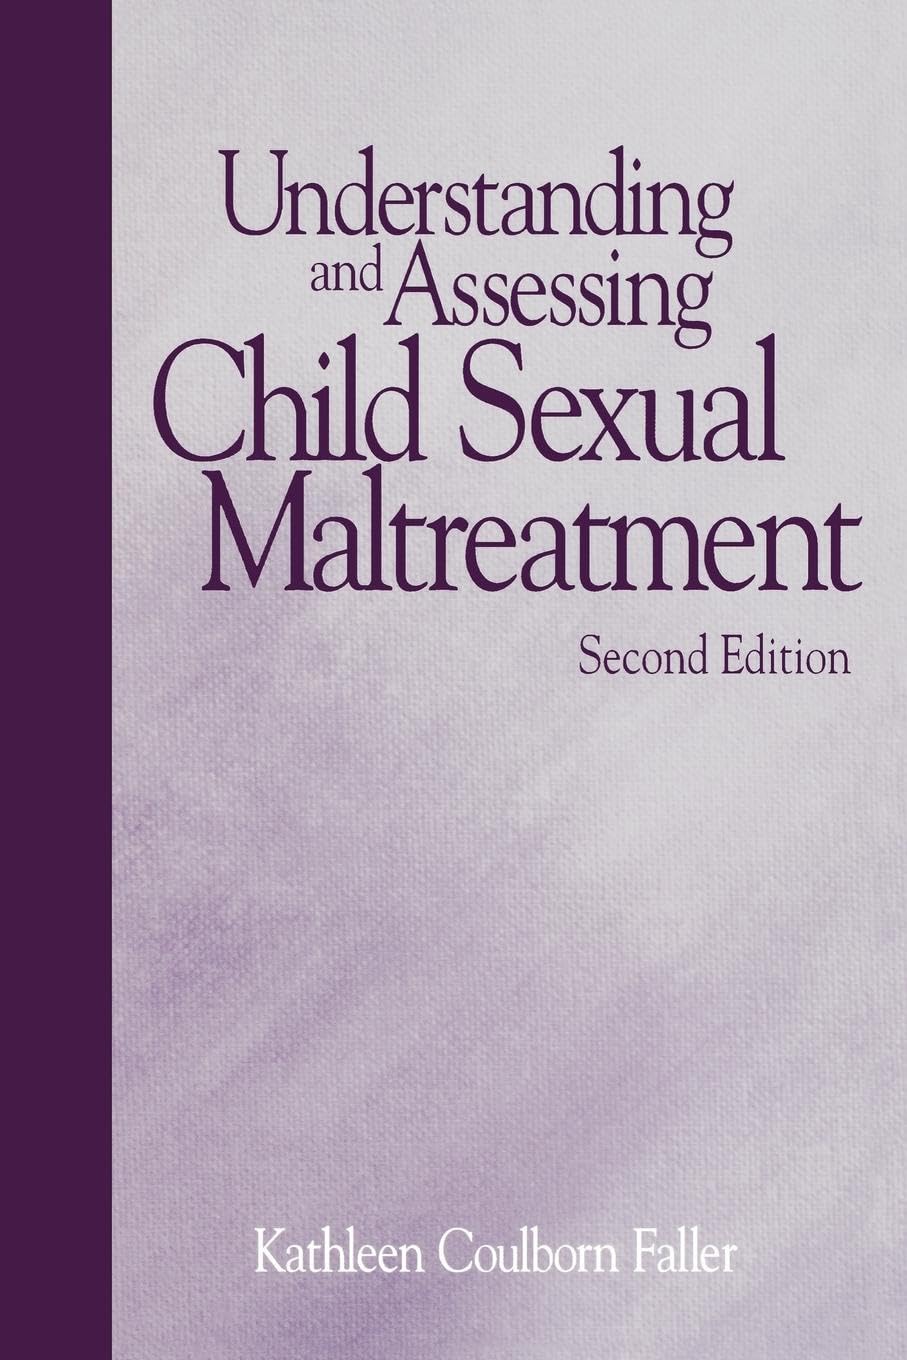 Understanding and Assessing Child Sexual Maltreatment